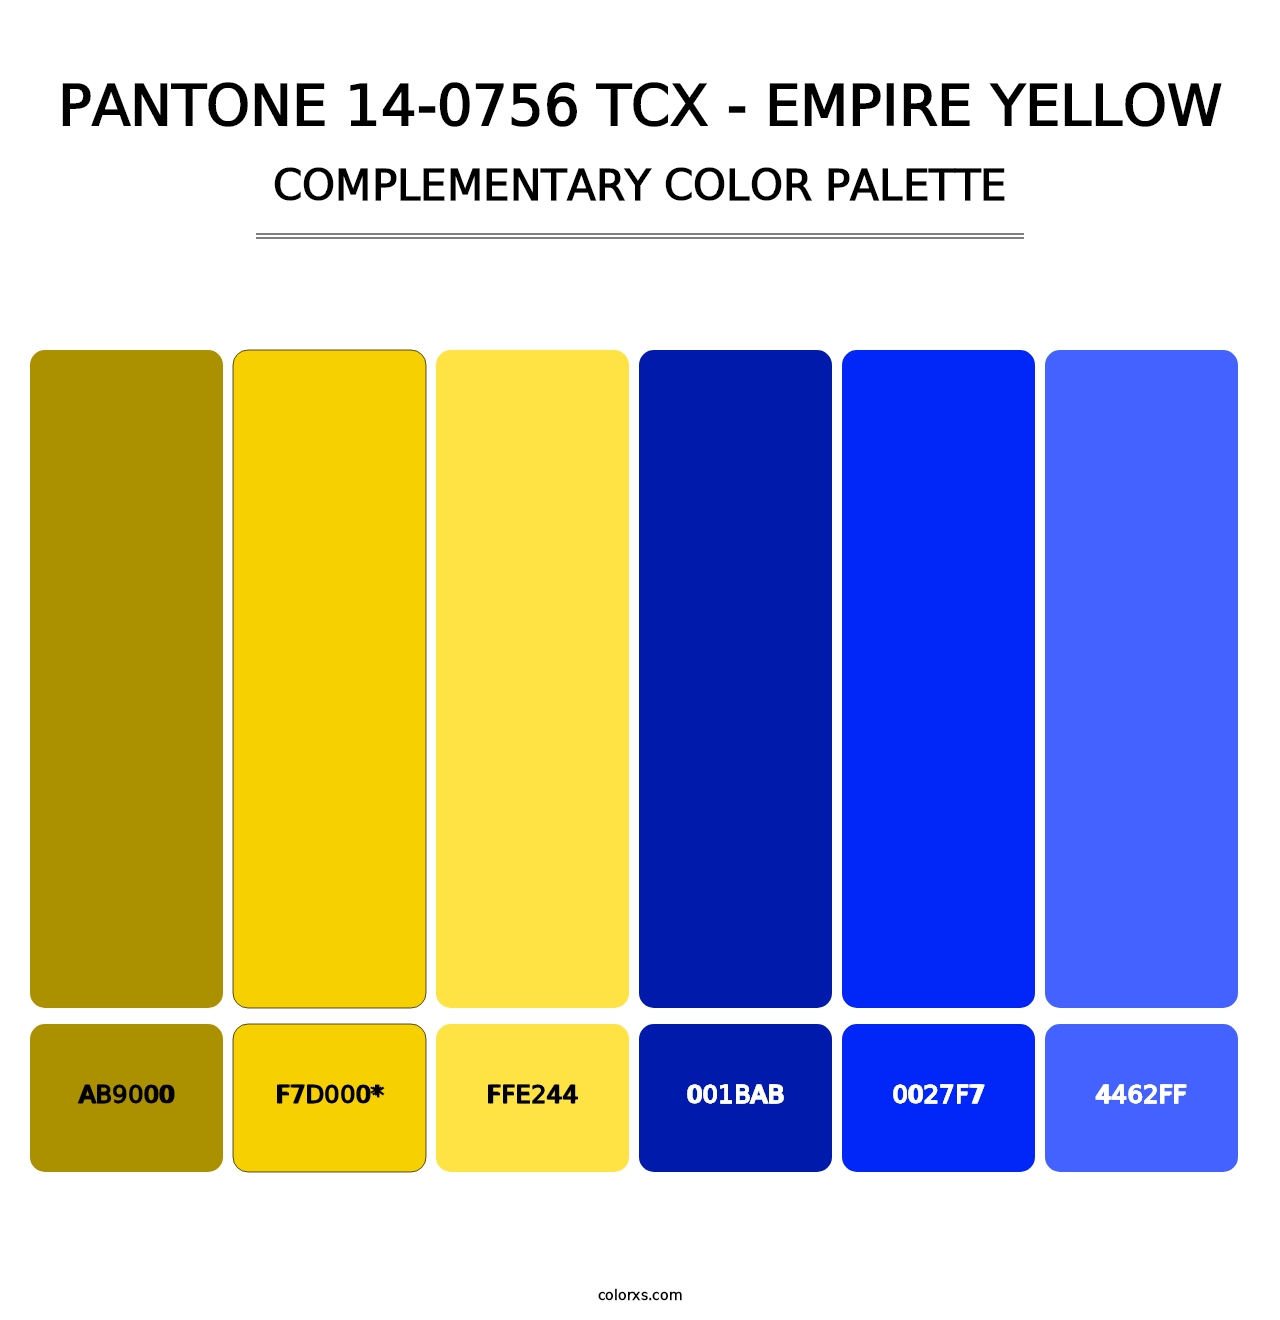 PANTONE 14-0756 TCX - Empire Yellow - Complementary Color Palette